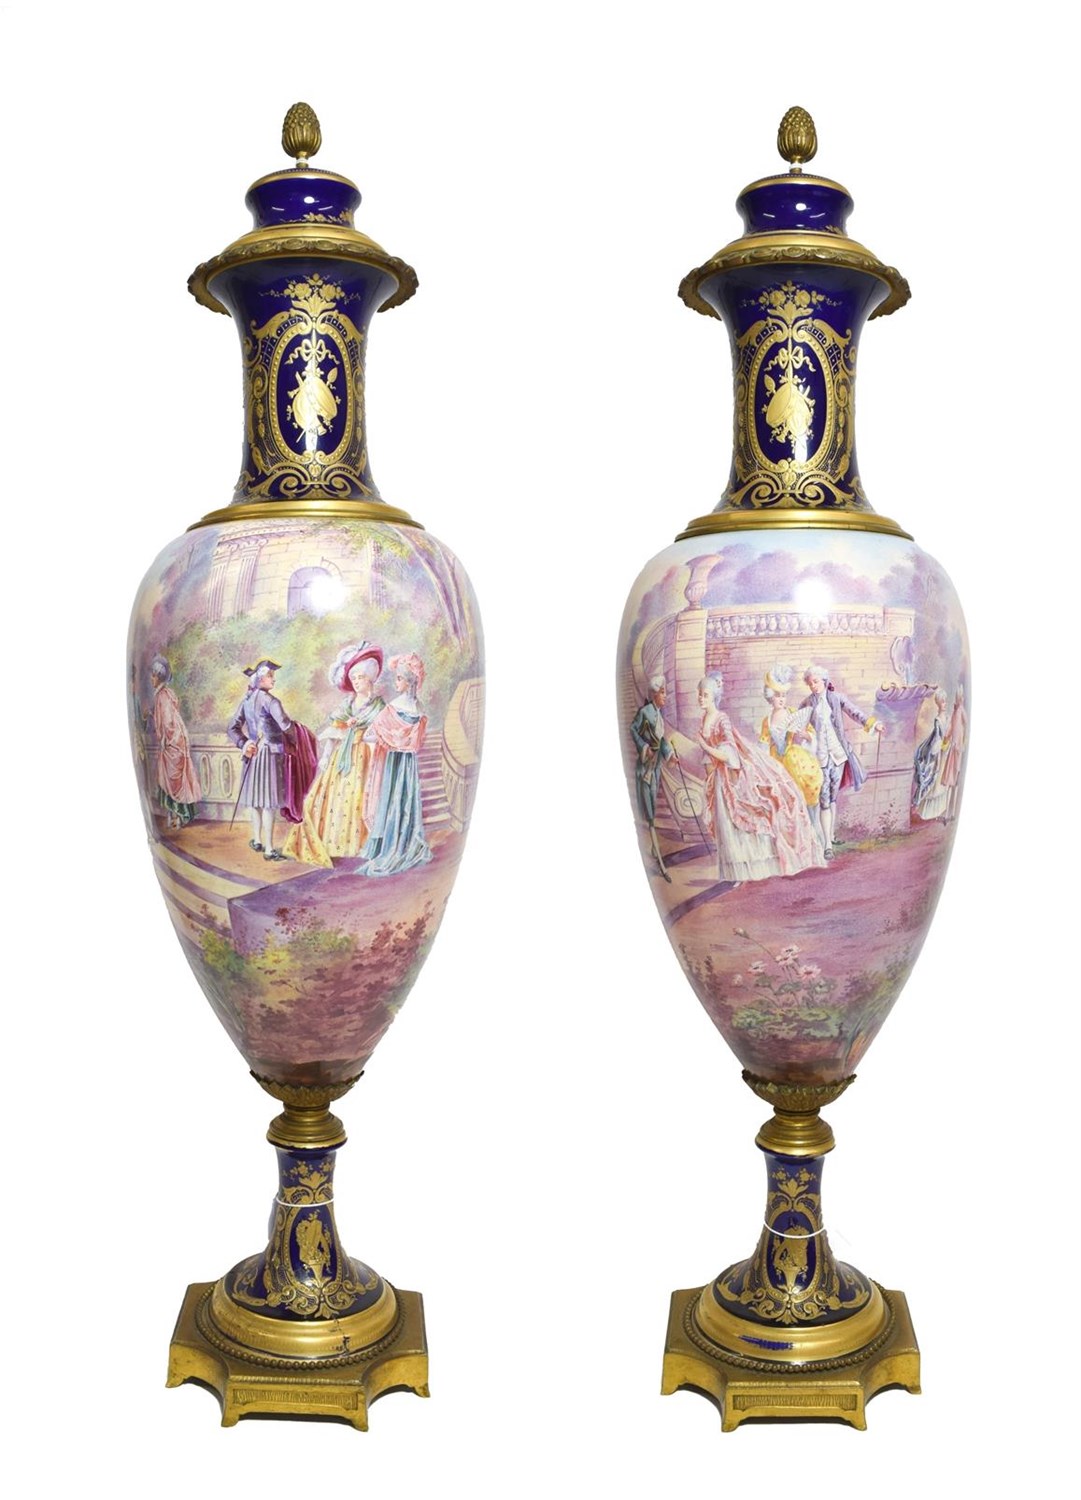 Lot 61 - A Pair of Gilt Metal Mounted Sèvres Style Earthenware Vases and Covers, circa 1900, of...